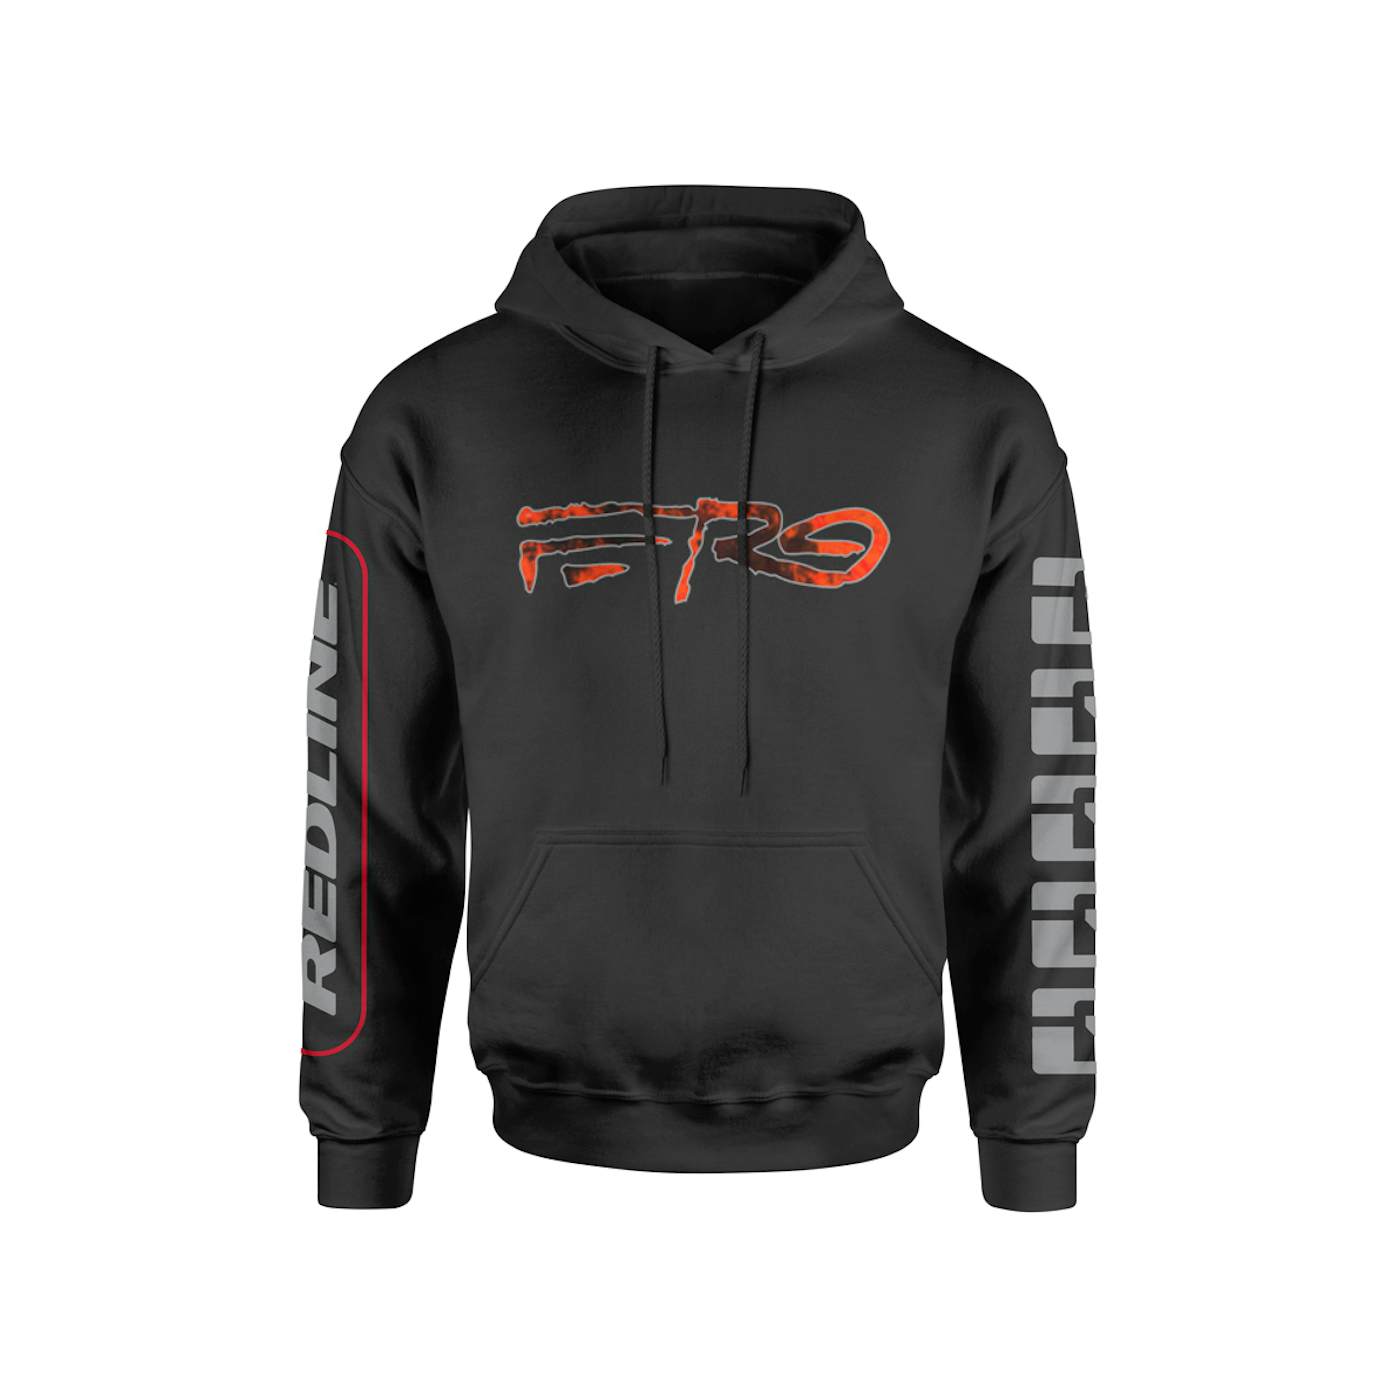 A$AP Ferg x Redline "Ride With The Mob" 3M Hoodie